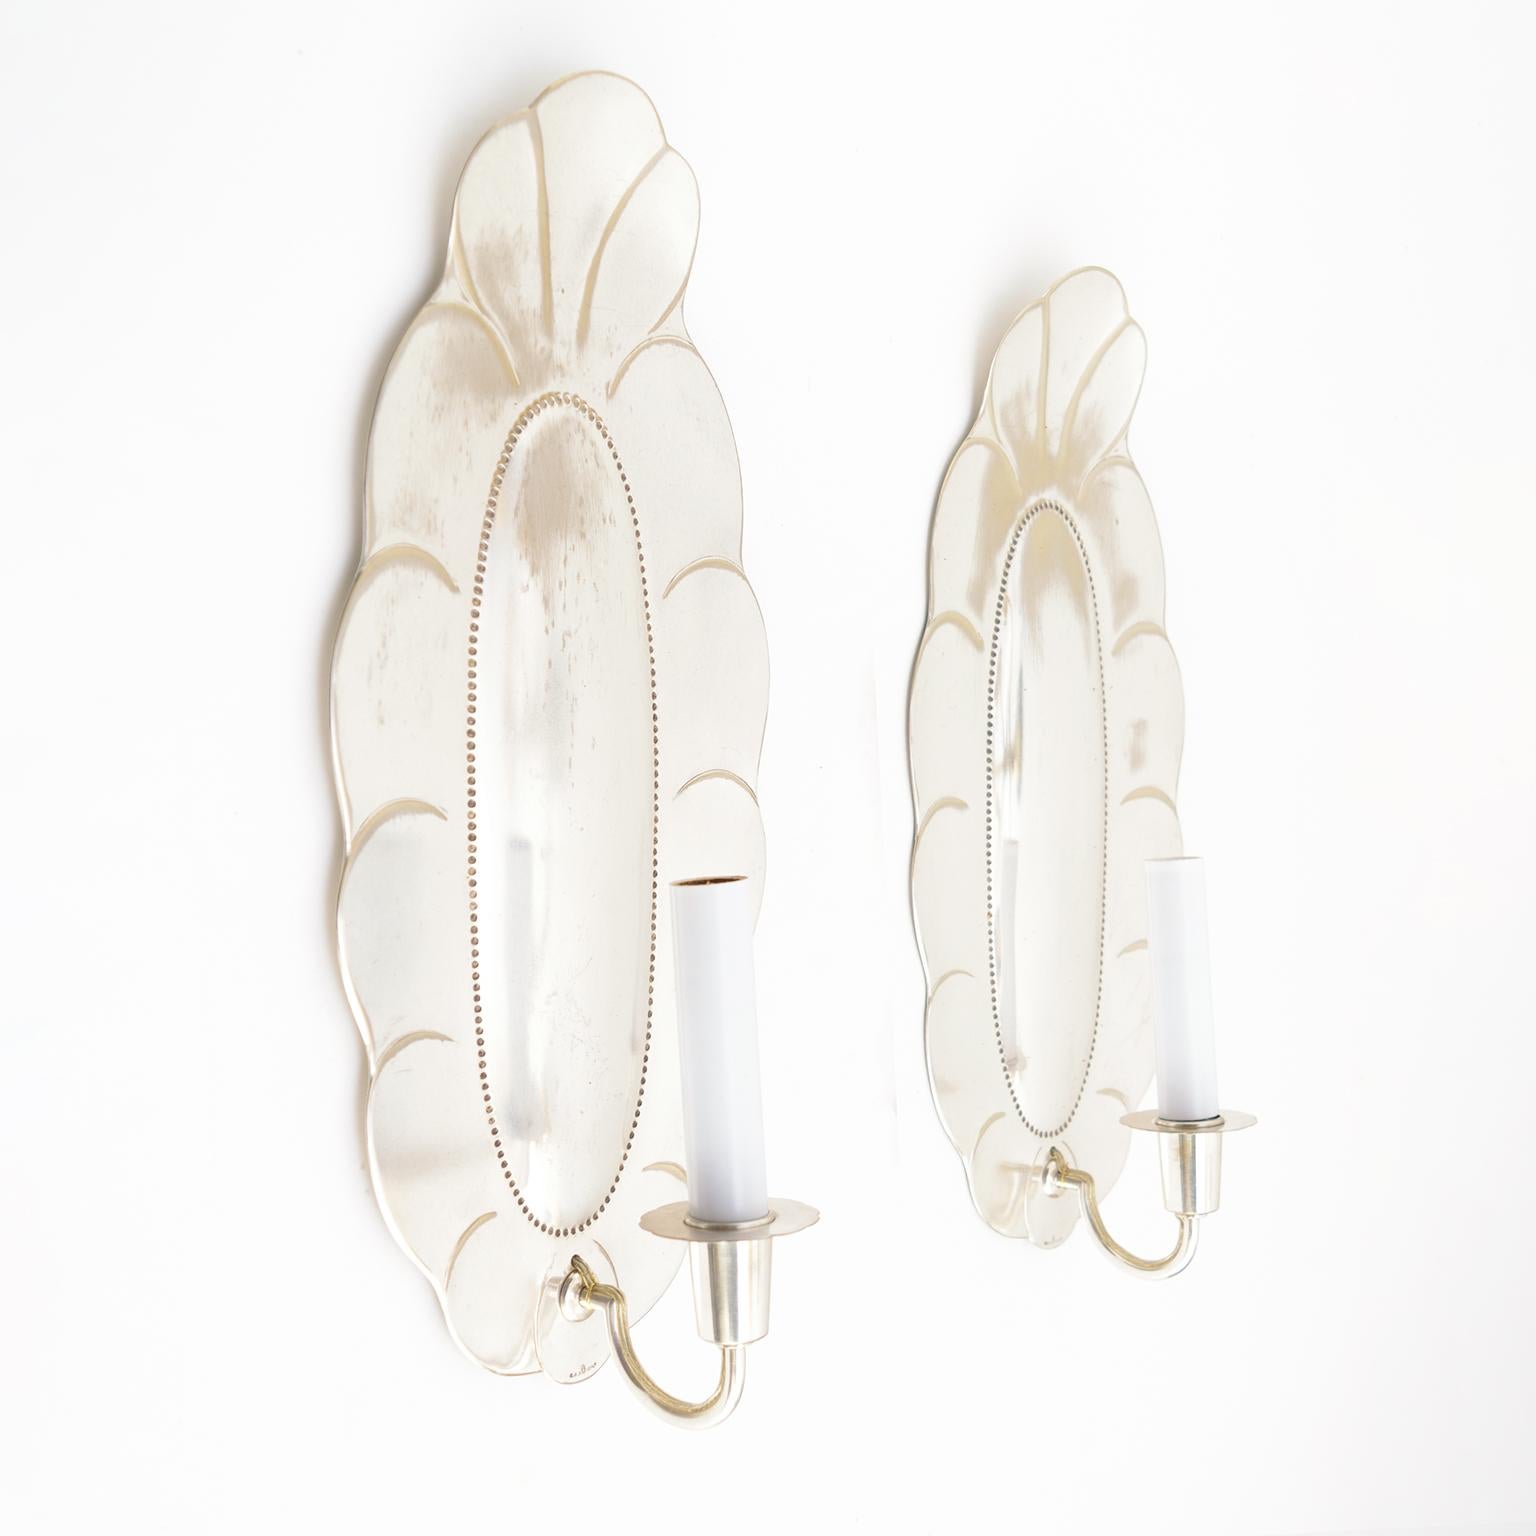 Large pair of Swedish art deco silver plated sconces from Jacob Ängman for GAB, Stockholm. The sconces have been newly polished, lacquered and electrified with candelabra sockets. Light wear to backplates with silver loss. 

Measures: Height 15